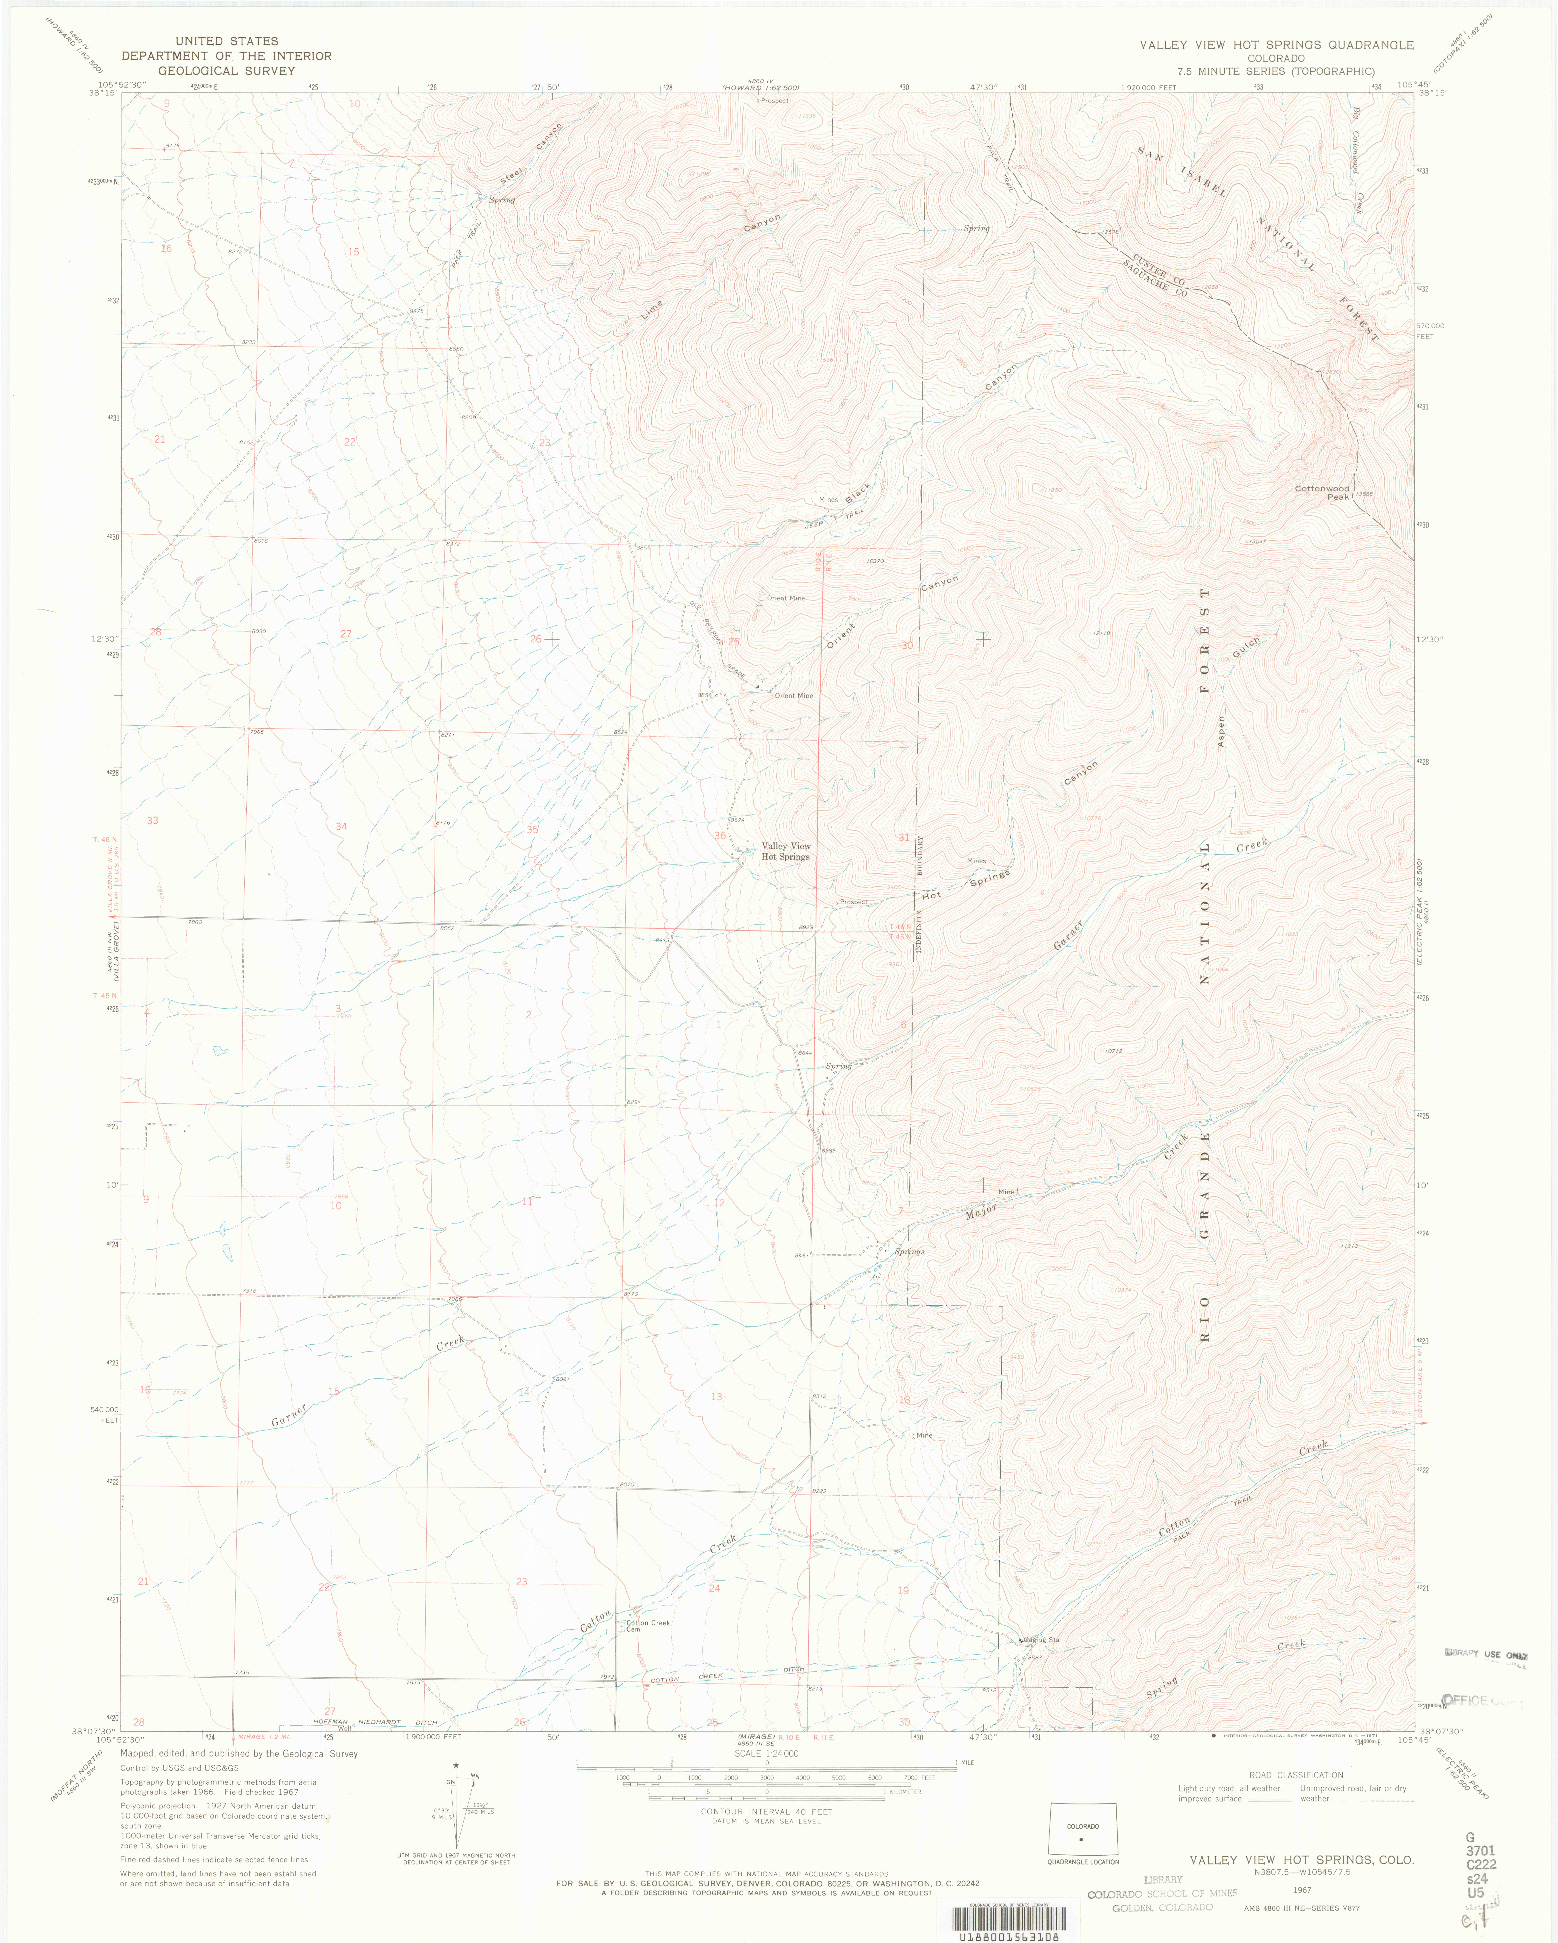 USGS 1:24000-SCALE QUADRANGLE FOR VALLEY VIEW HOT SPRINGS, CO 1967